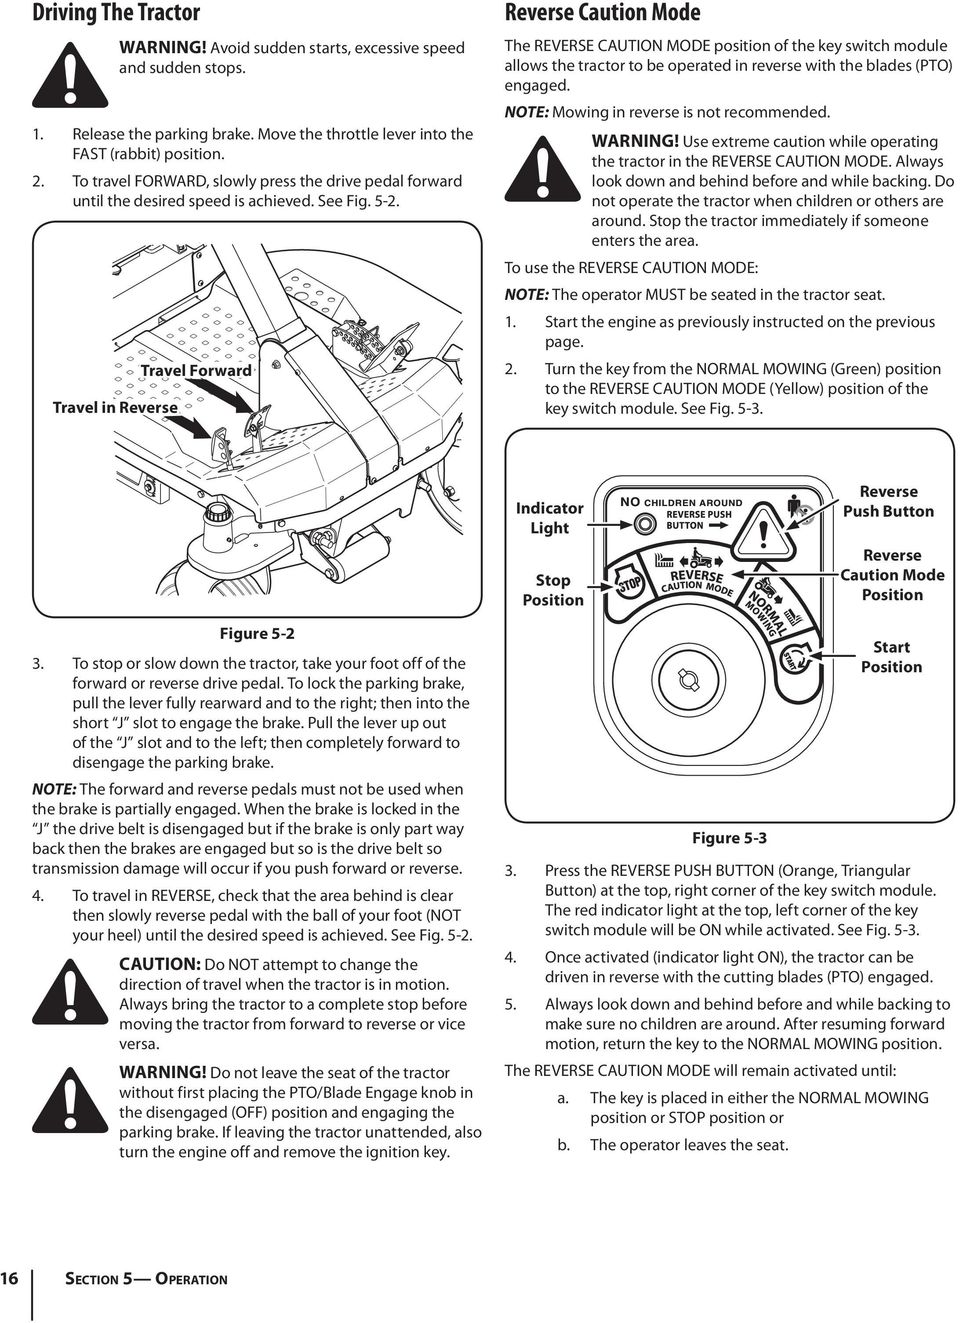 5- Travel in Reverse Travel Forward Reverse Caution Mode The REVERSE CAUTION MODE position of the key switch module allows the tractor to be operated in reverse with the blades (PTO) engaged.